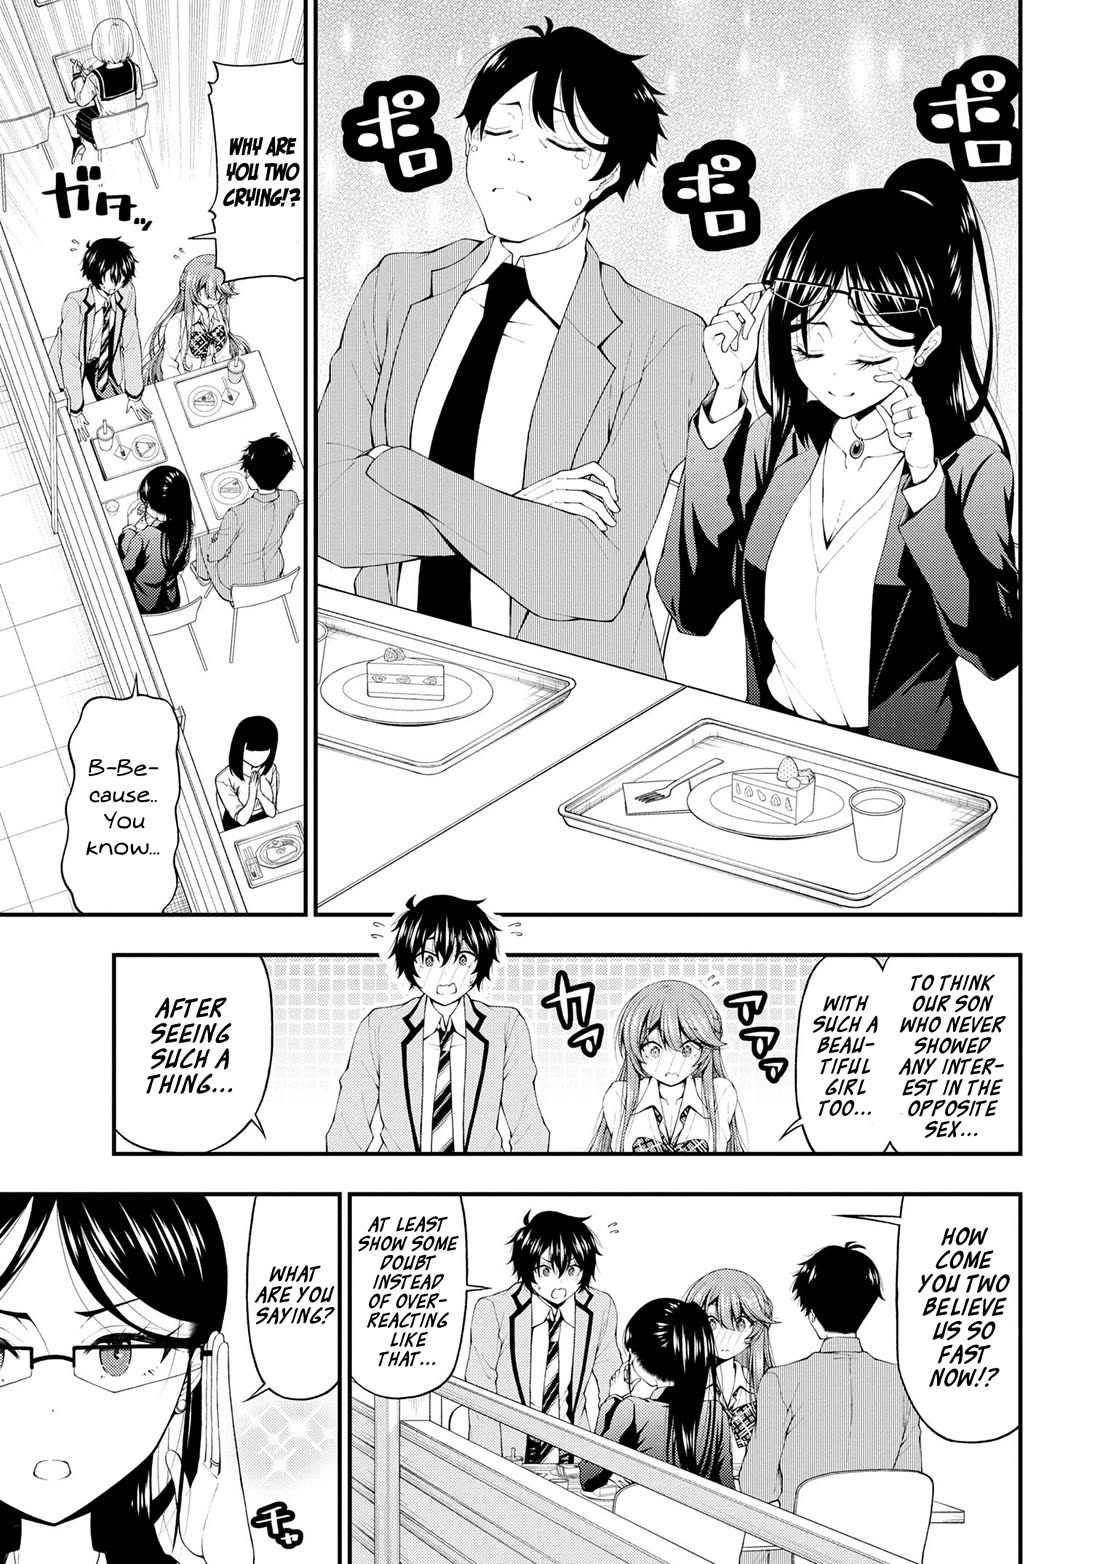 The Gal Who Was Meant to Confess to Me as a Game Punishment - chapter 15 - #3